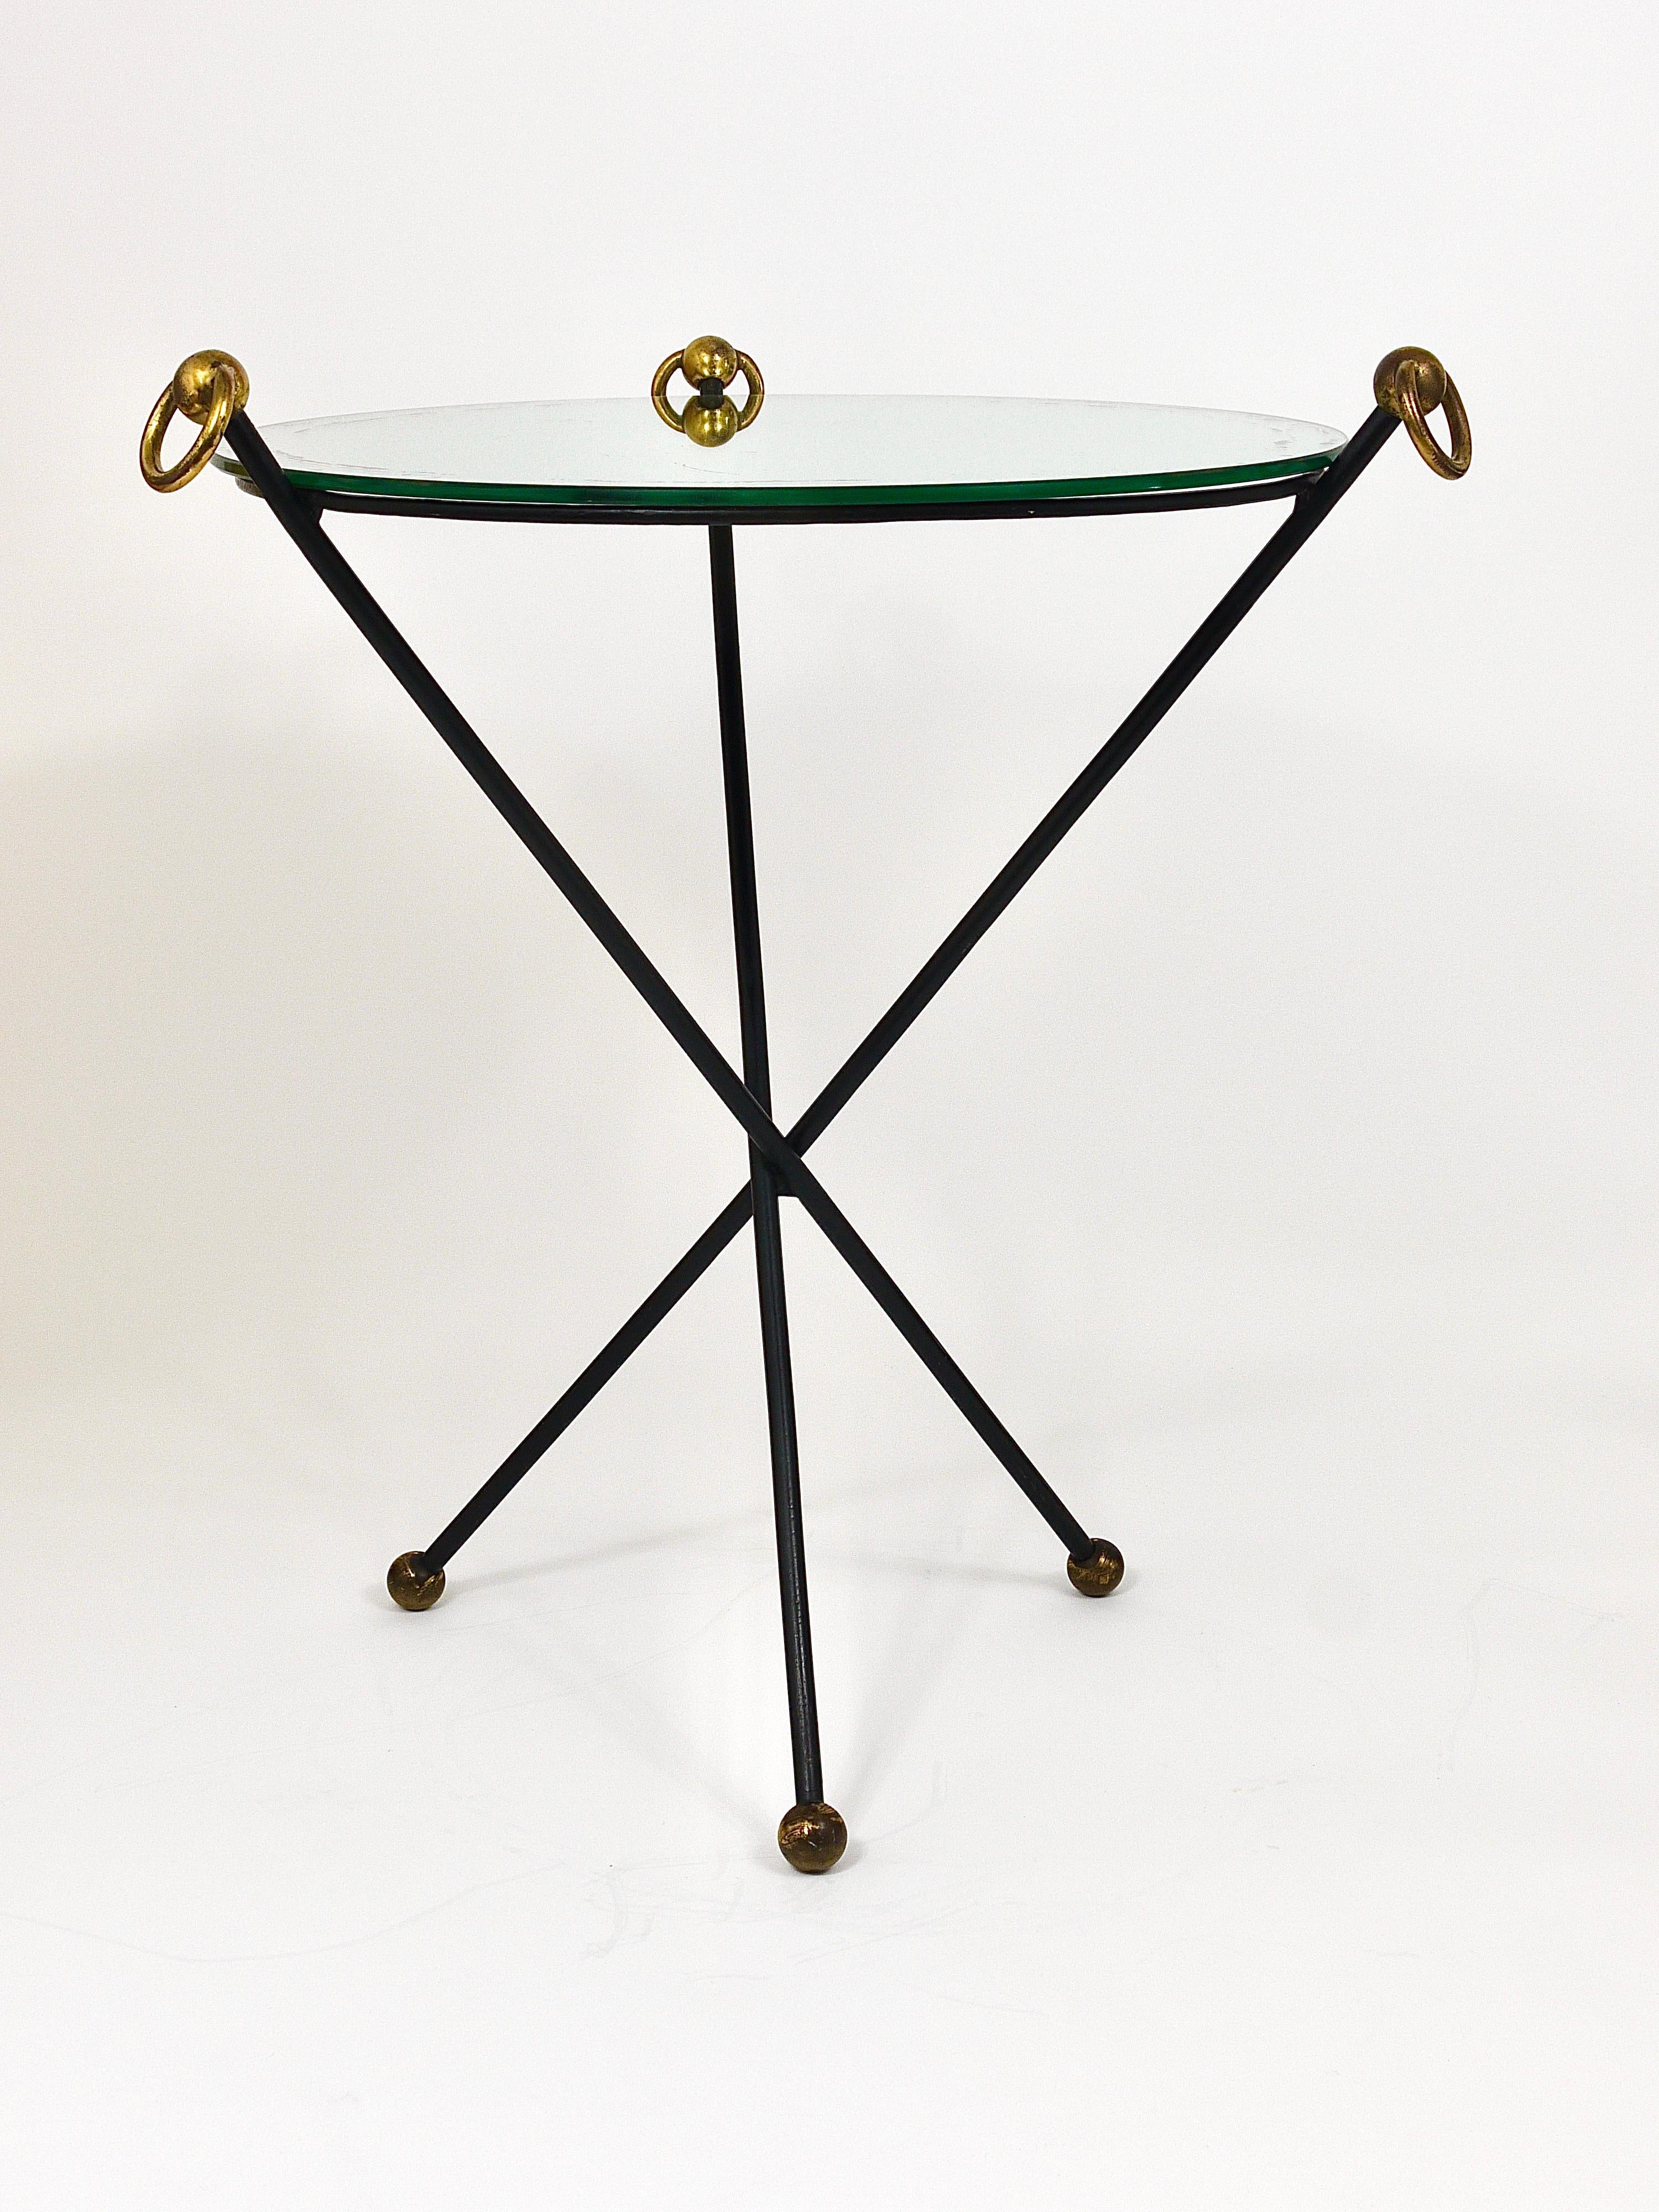 French Mid-Century Modern Mirror Side Table, Jacques Adnet Style, Brass, 1950s For Sale 11